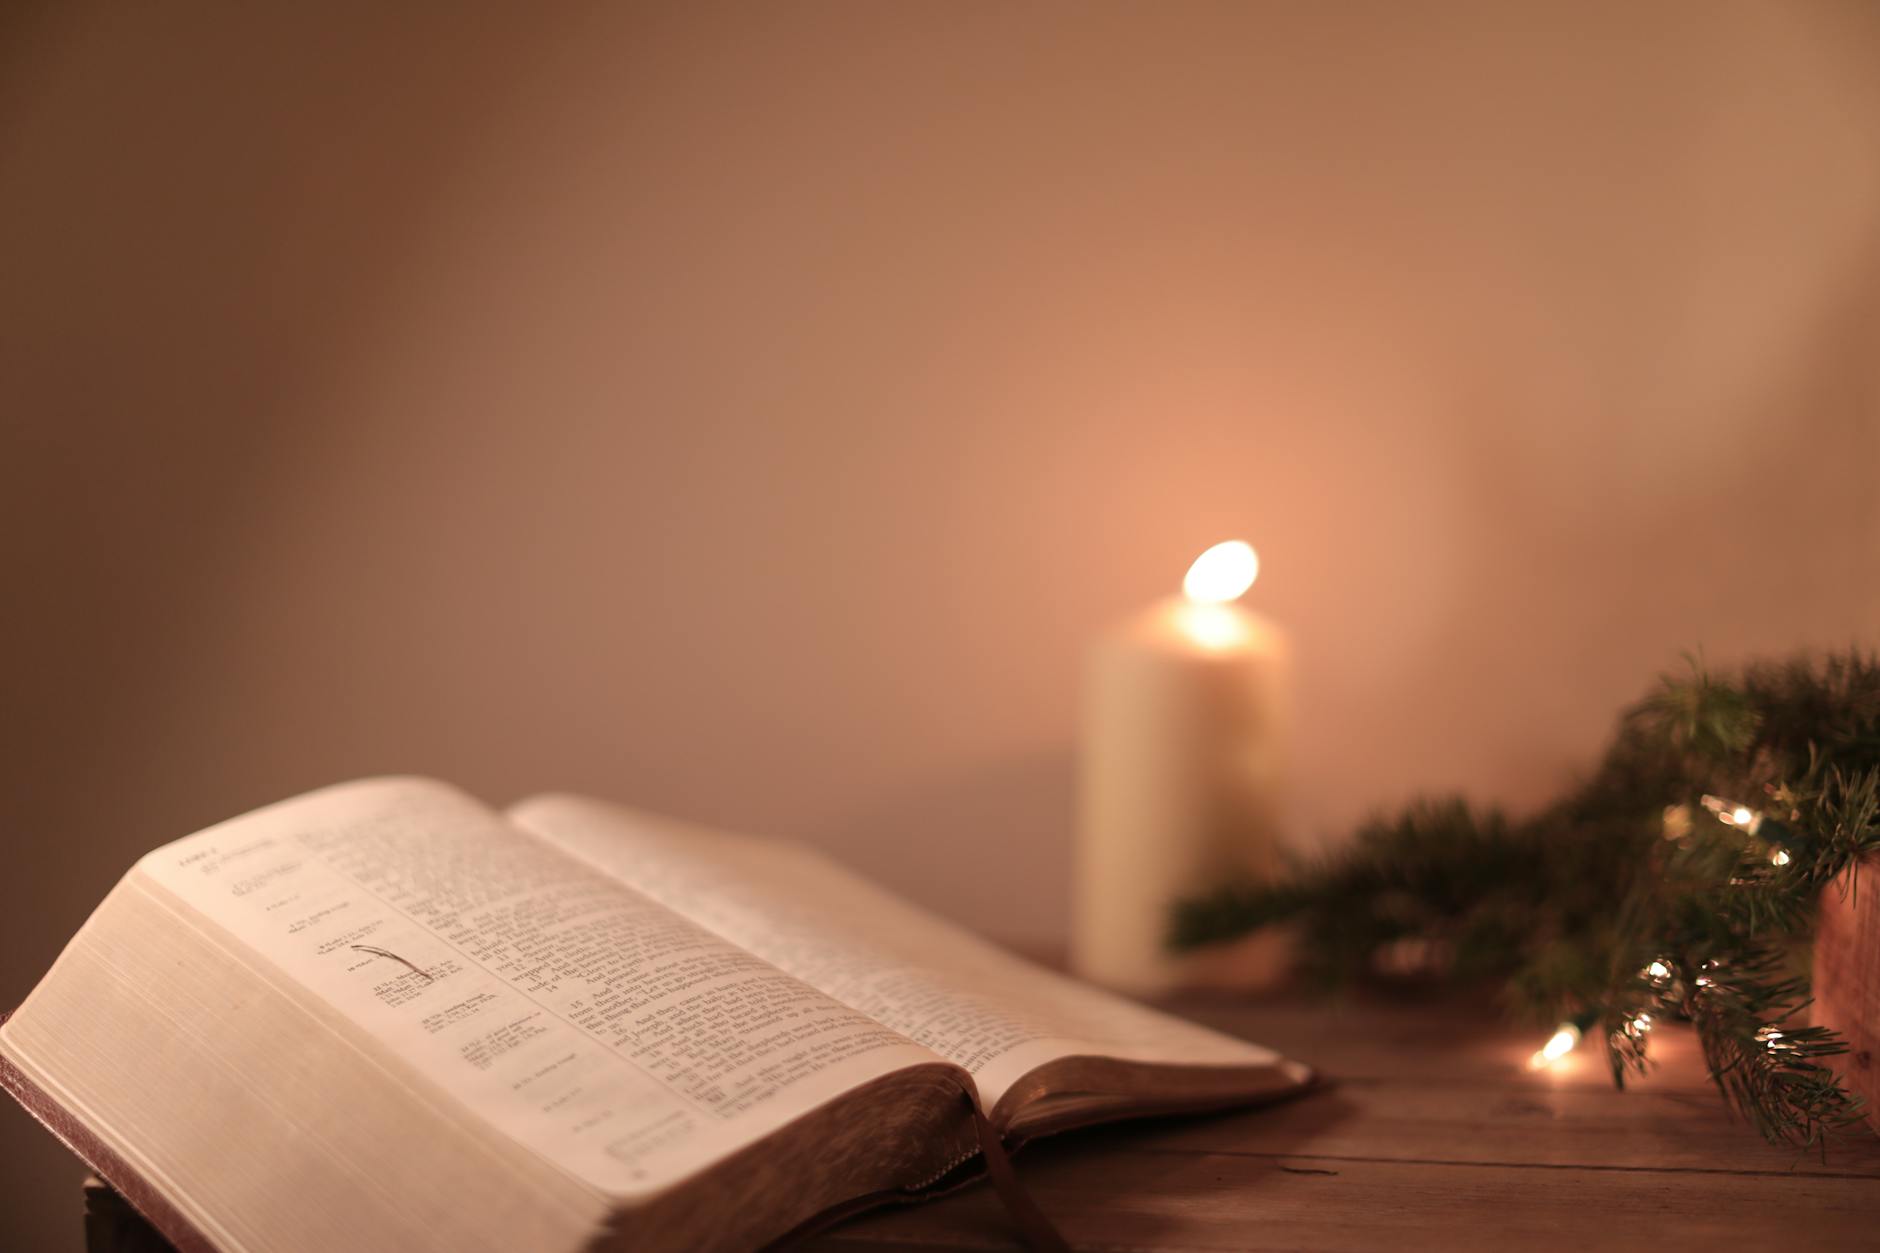 a bible on a wooden surface with pine leaves and christmas lights